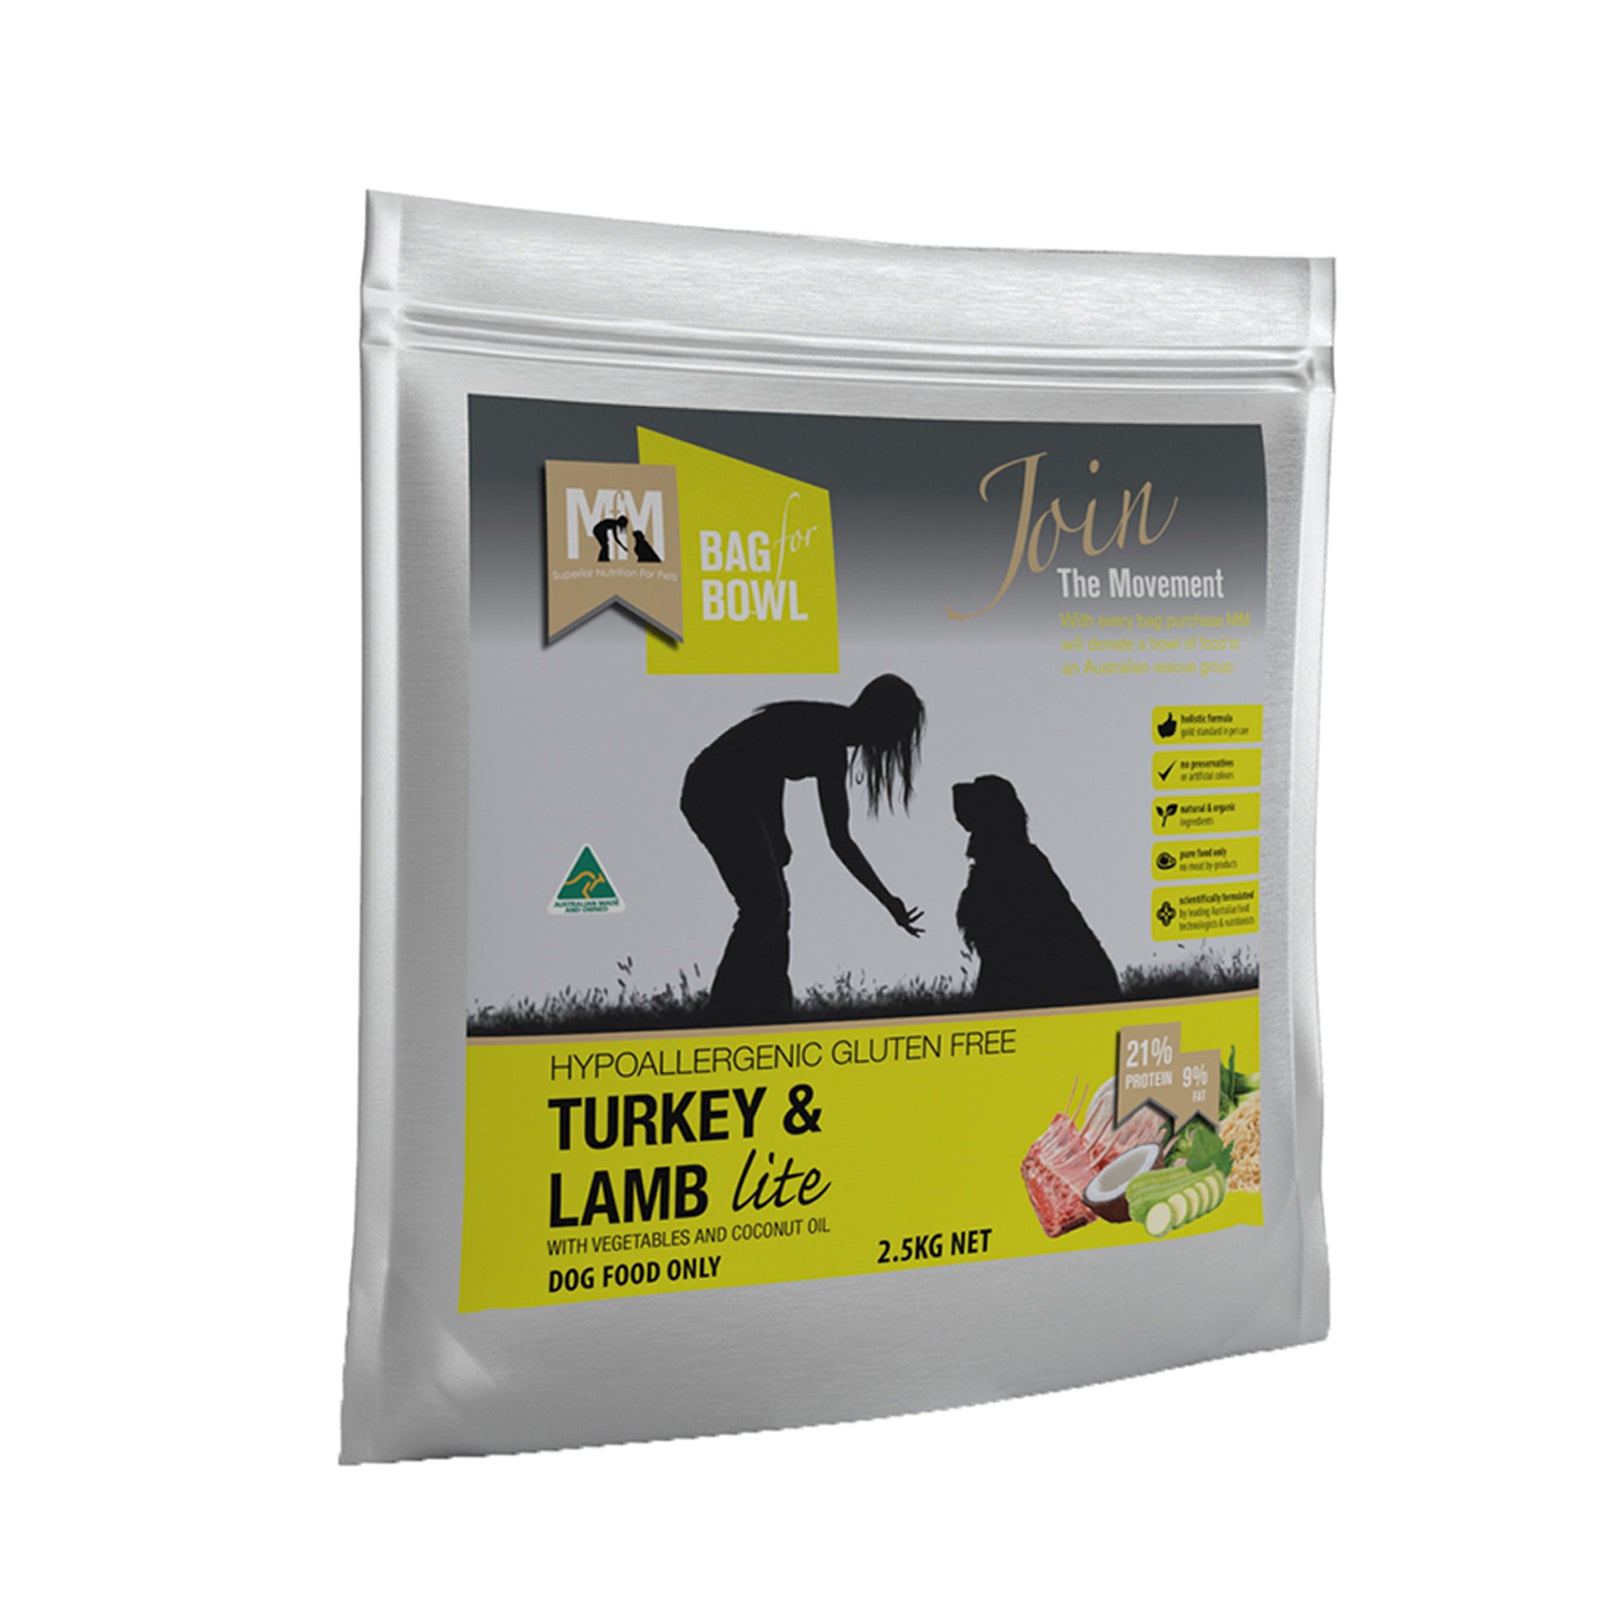 Meals For Mutts Turkey and Lamb Lite Gluten Free Dog Food